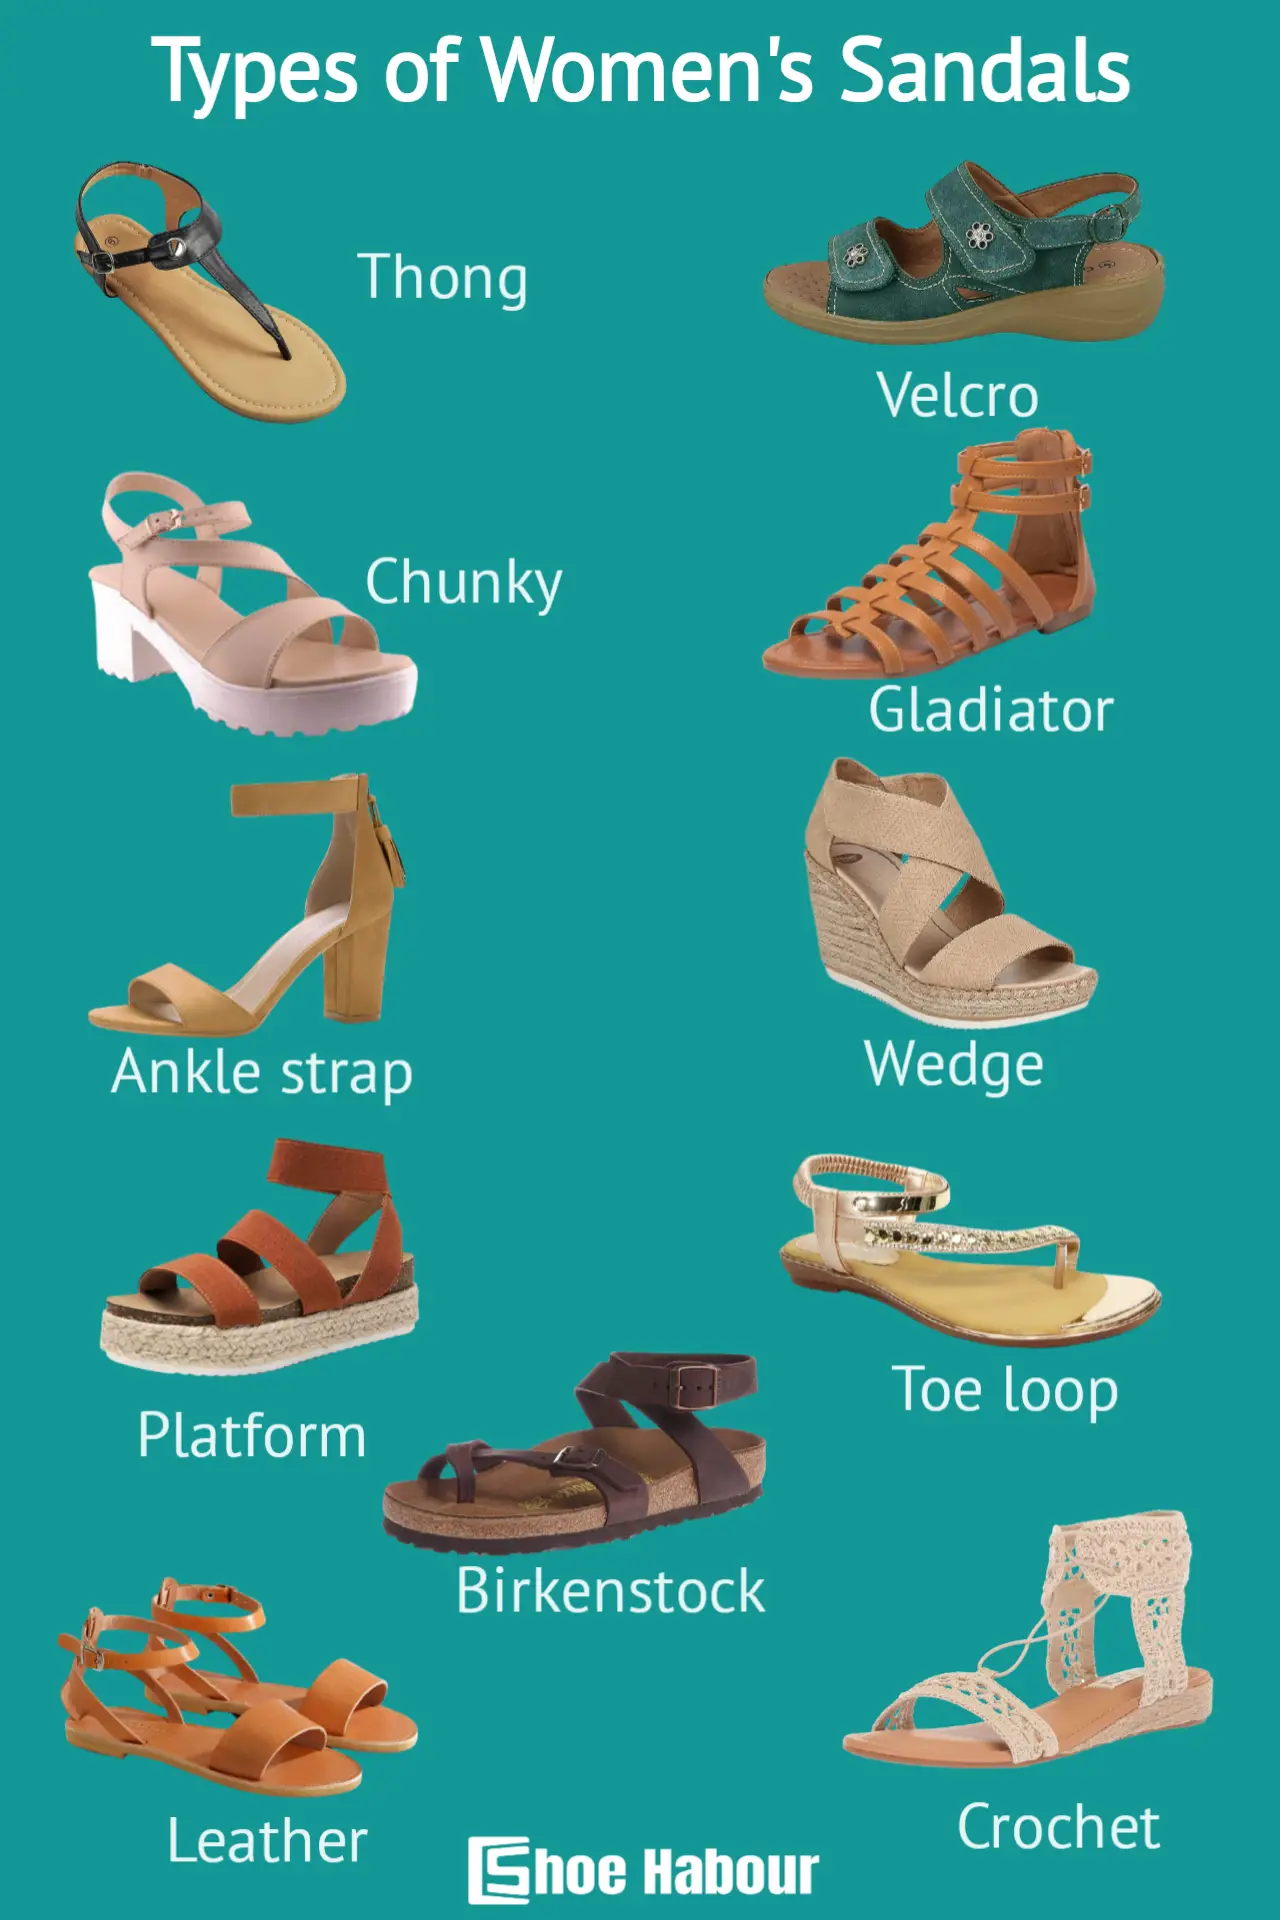 Types of sandals for women